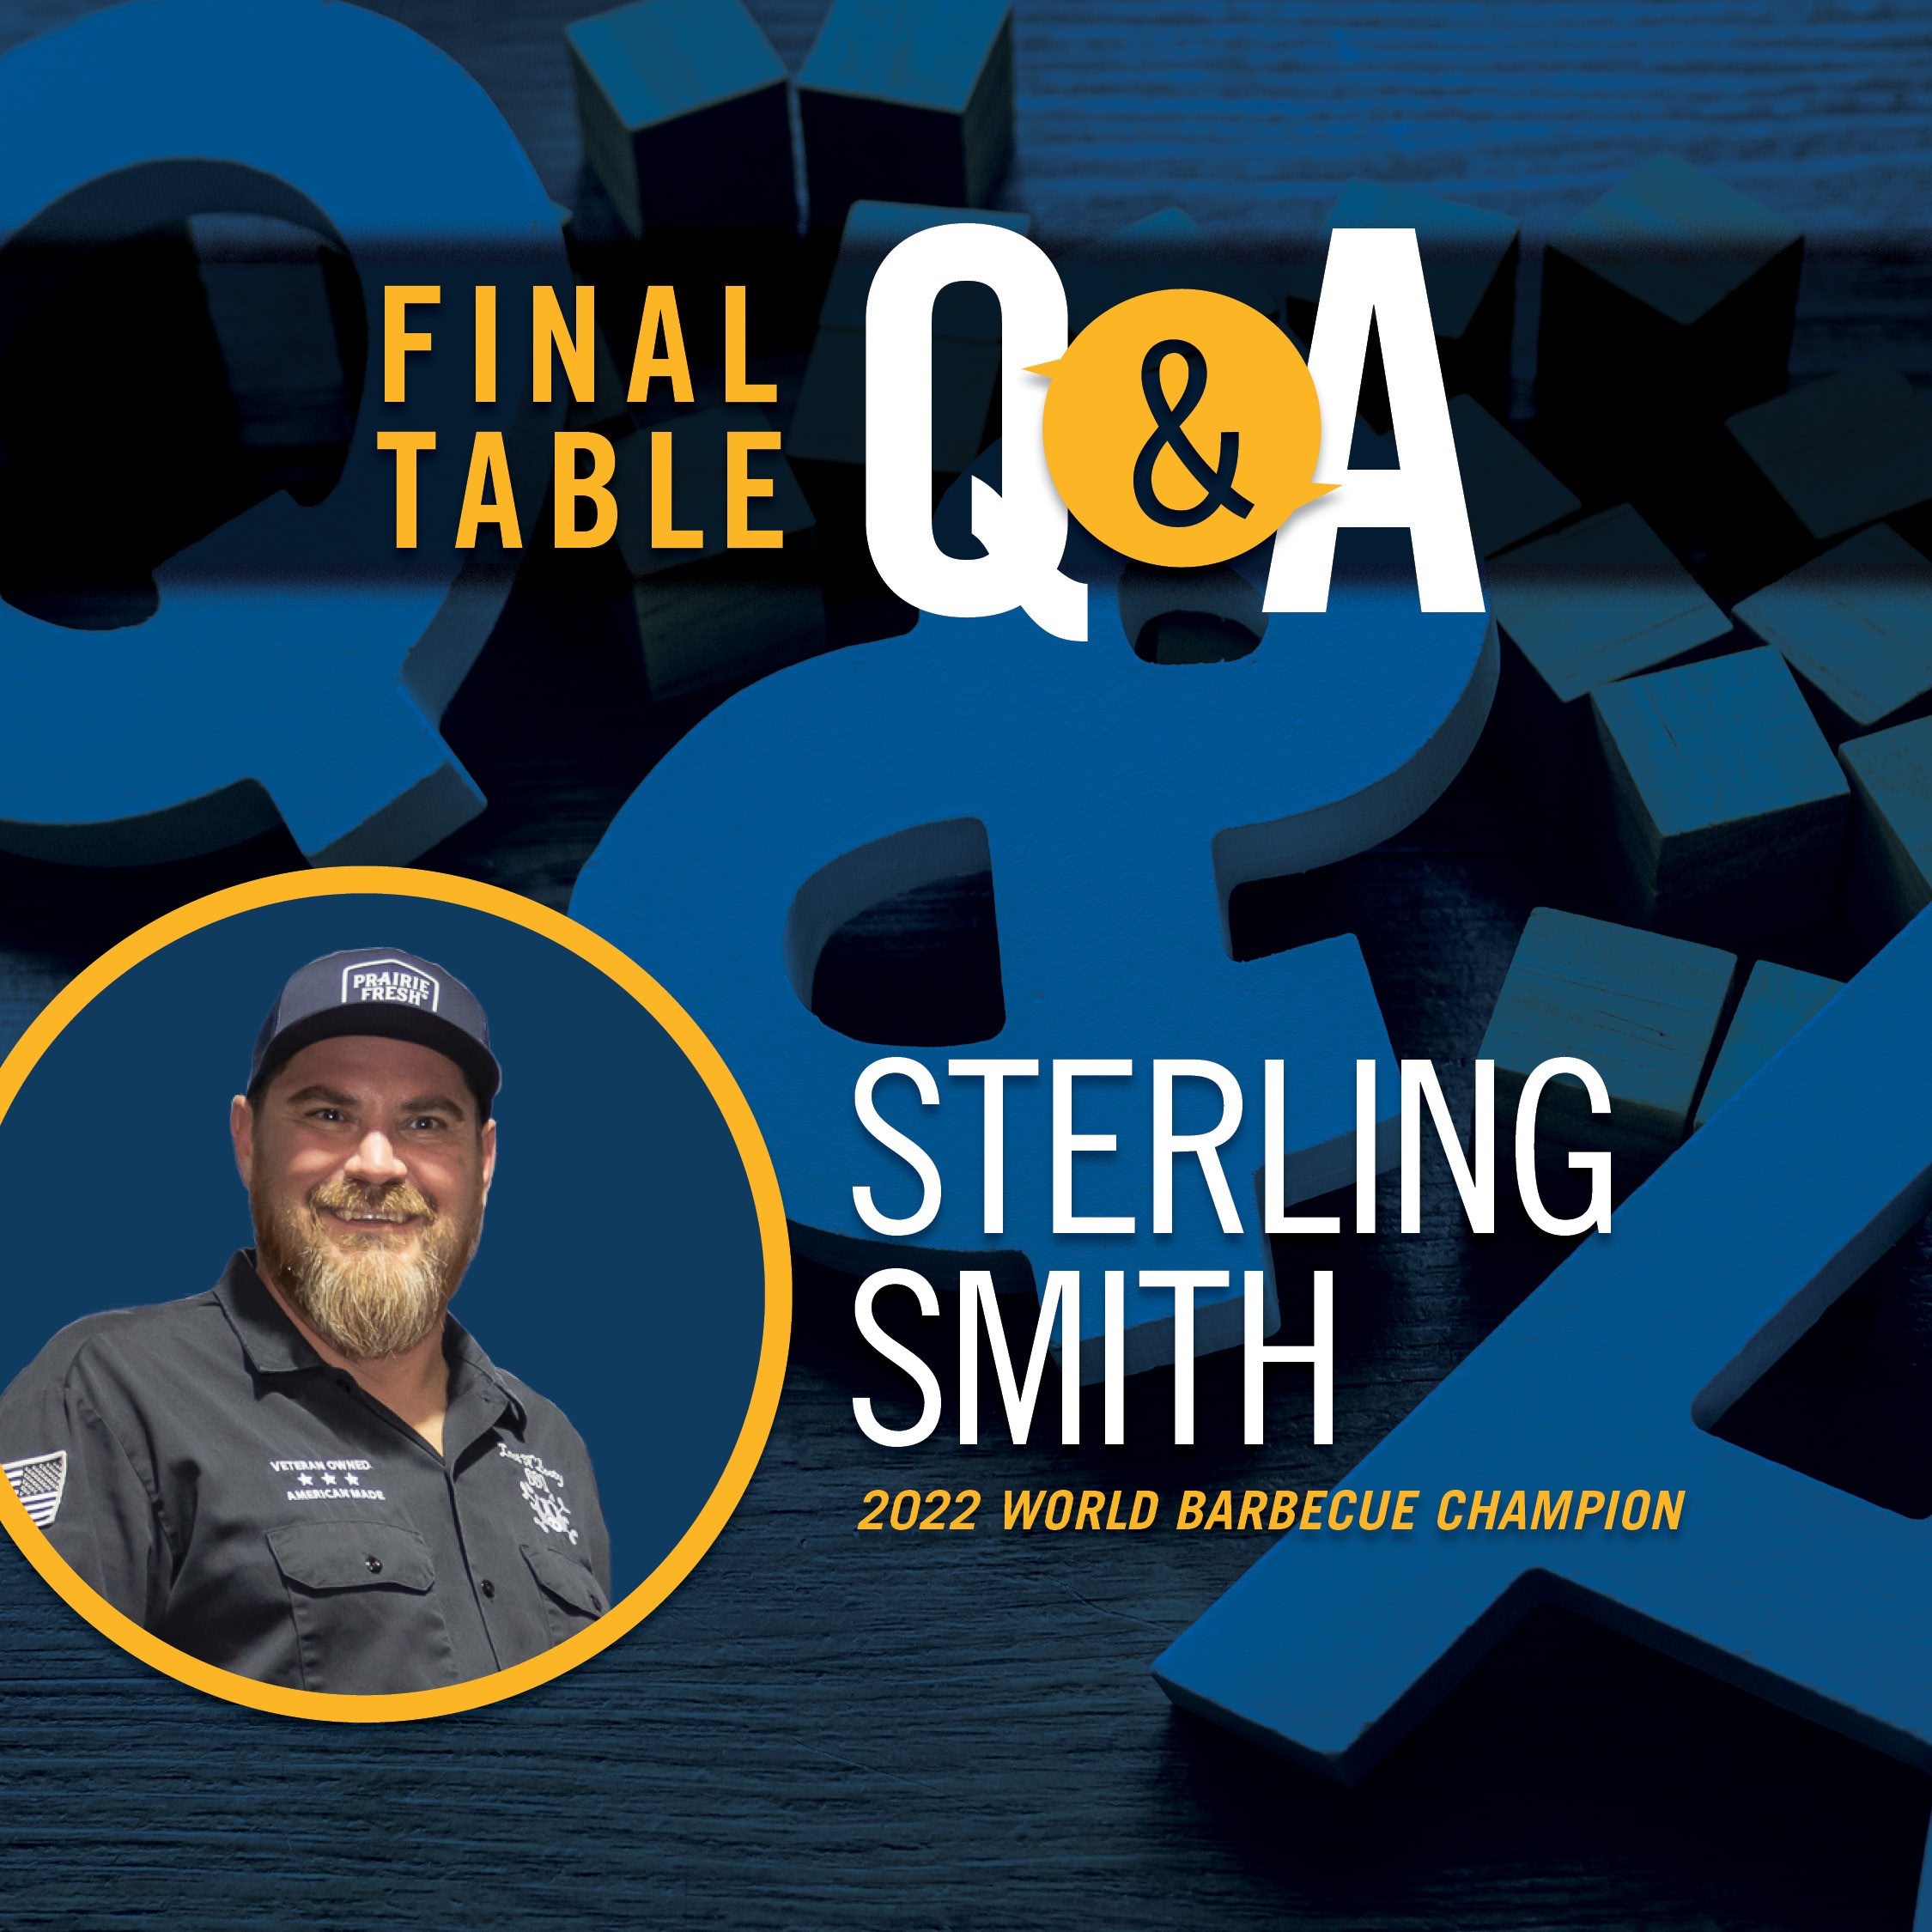 Final Table Q&As - Sterling Smith